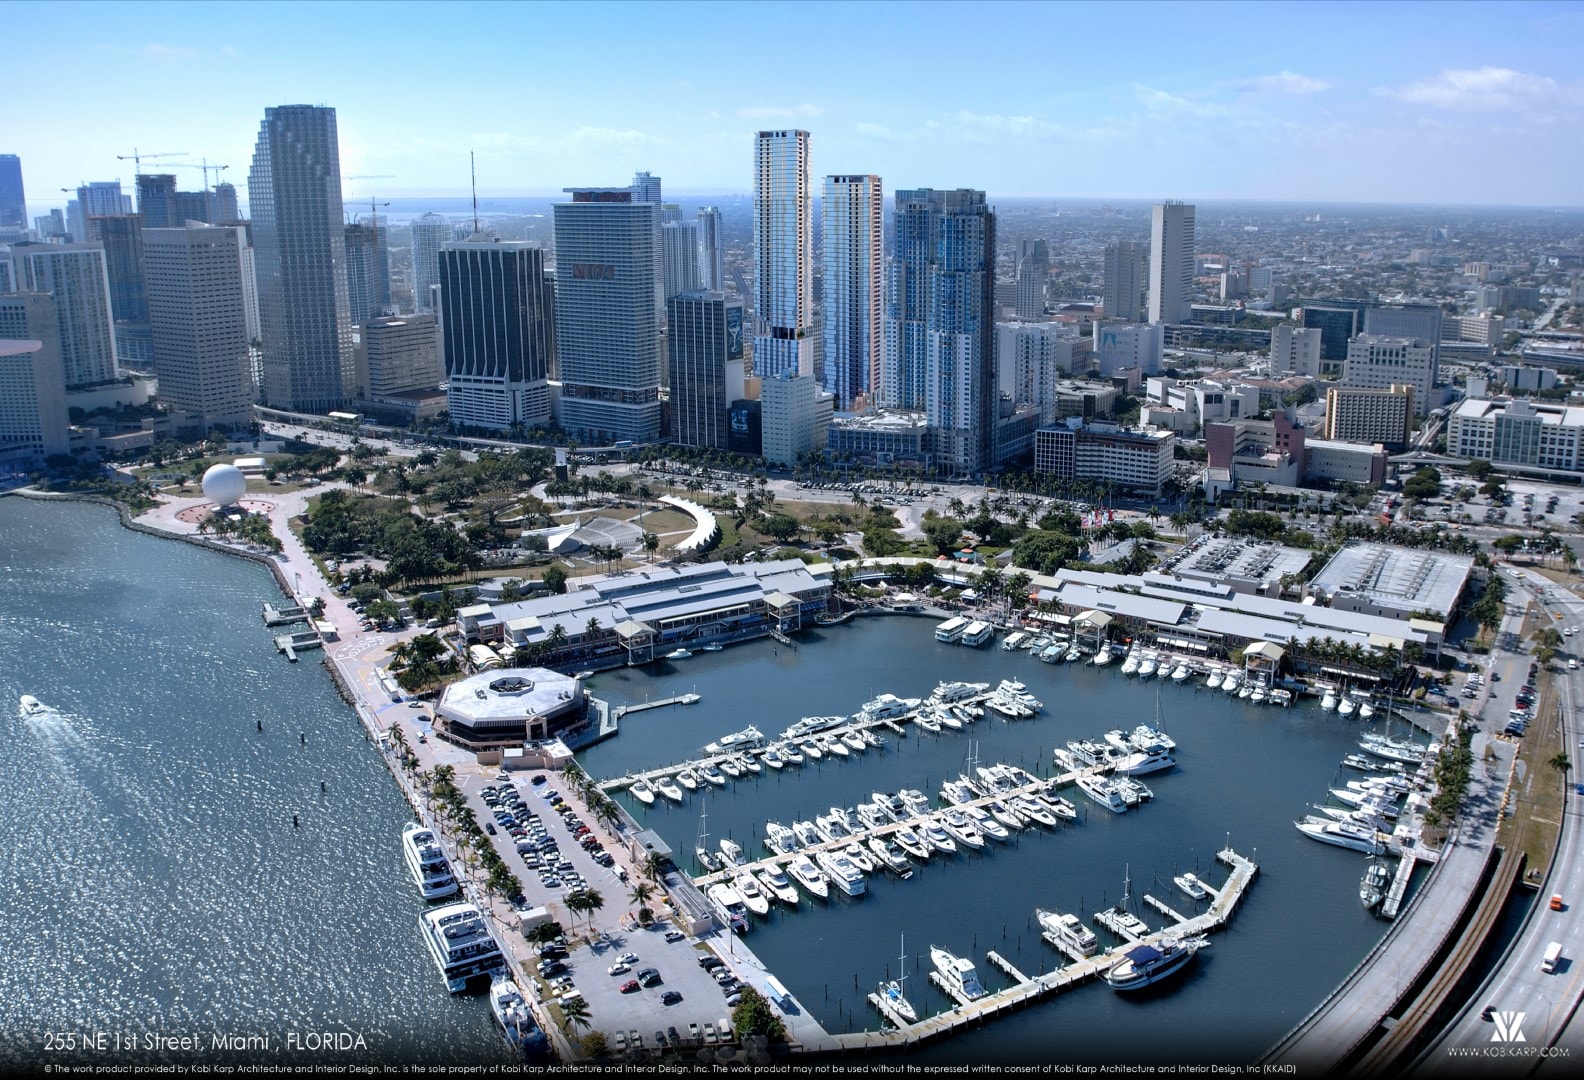 Israeli developer proposing two towers in Downtown Miami